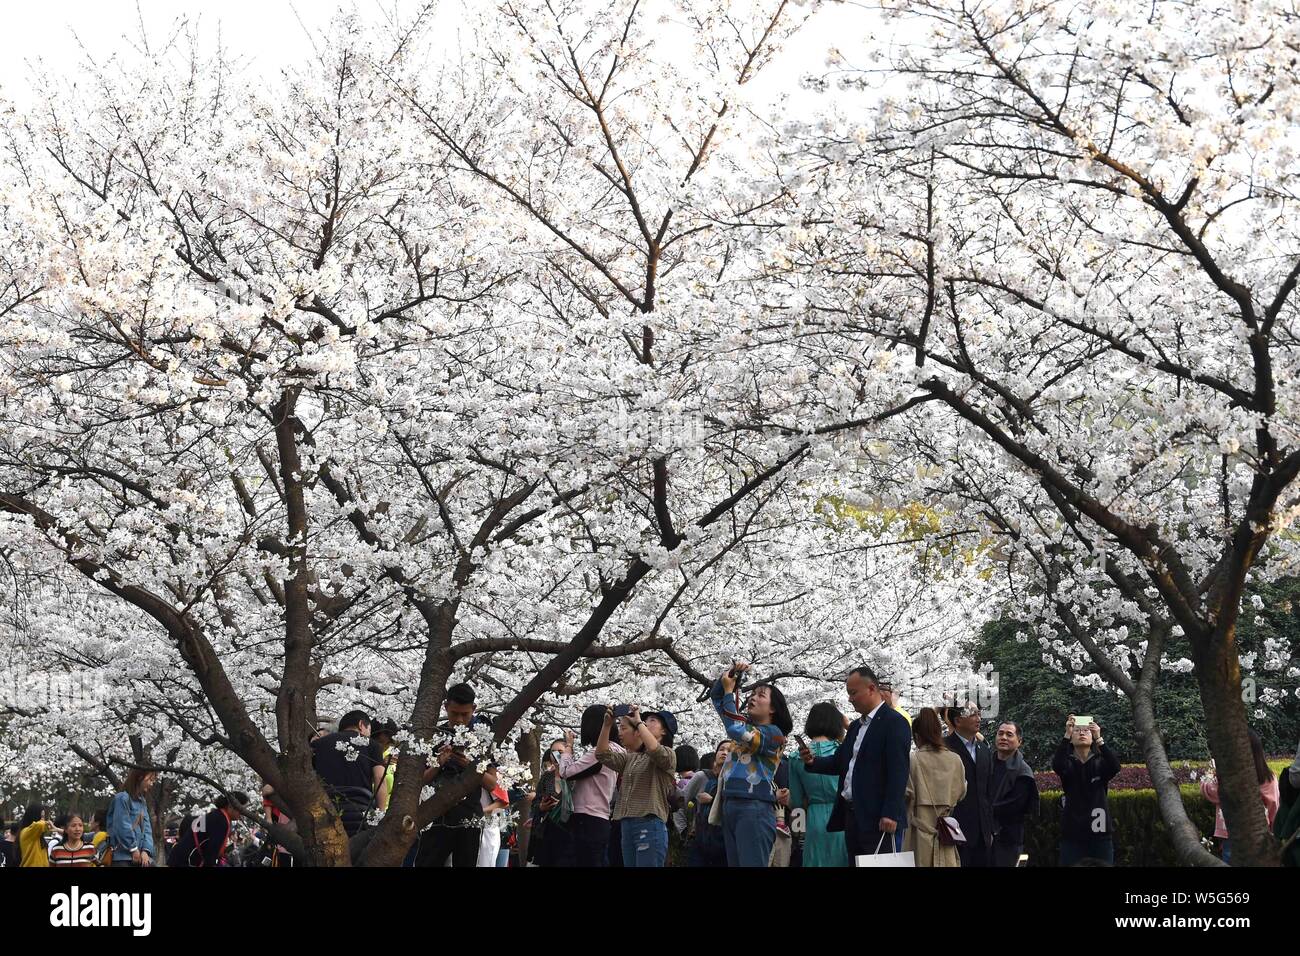 Tourists and college students enjoy the scenery of the cherry flowers in bloom at the campus of the Wuhan University in Wuhan city, central China's Hu Stock Photo